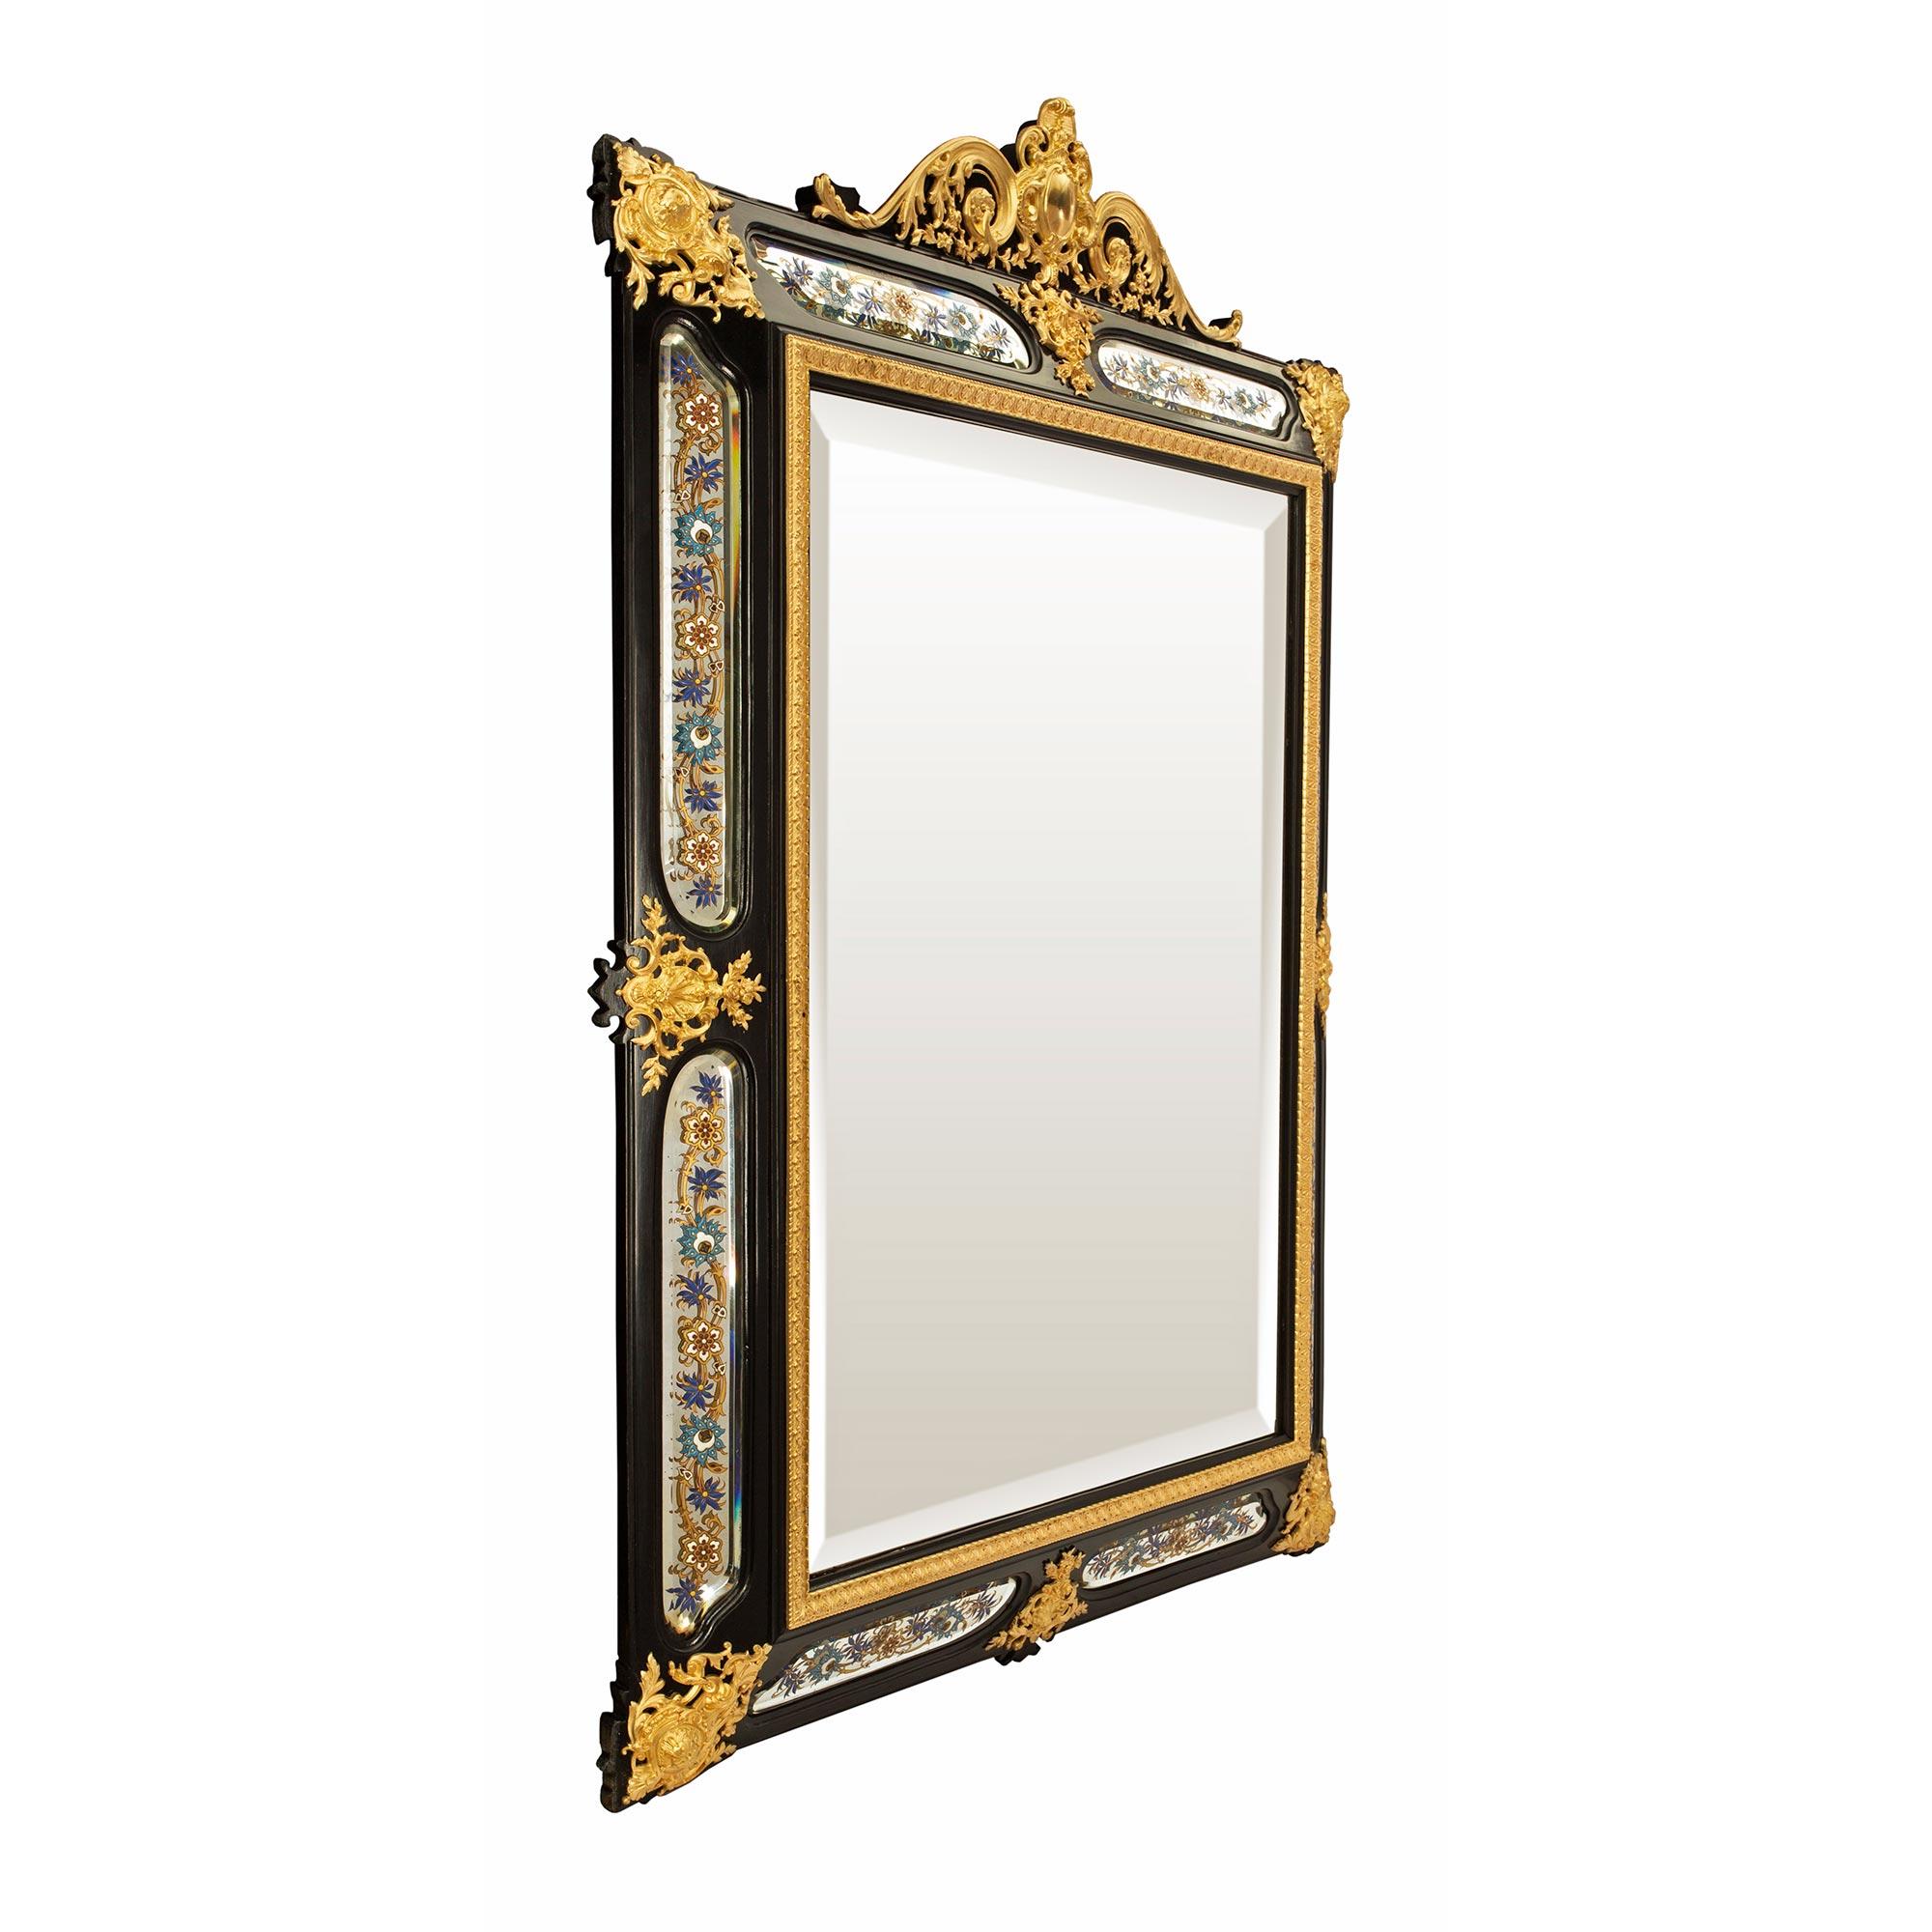 A stunning French mid 19th century Napoleon III period ebony and ormolu mirror. The ebony rectangular frame has beveled mirror inserts decorated by scrolled Églomisé floral designs, accented by richly chased ormolu mounts at each corner and sides.